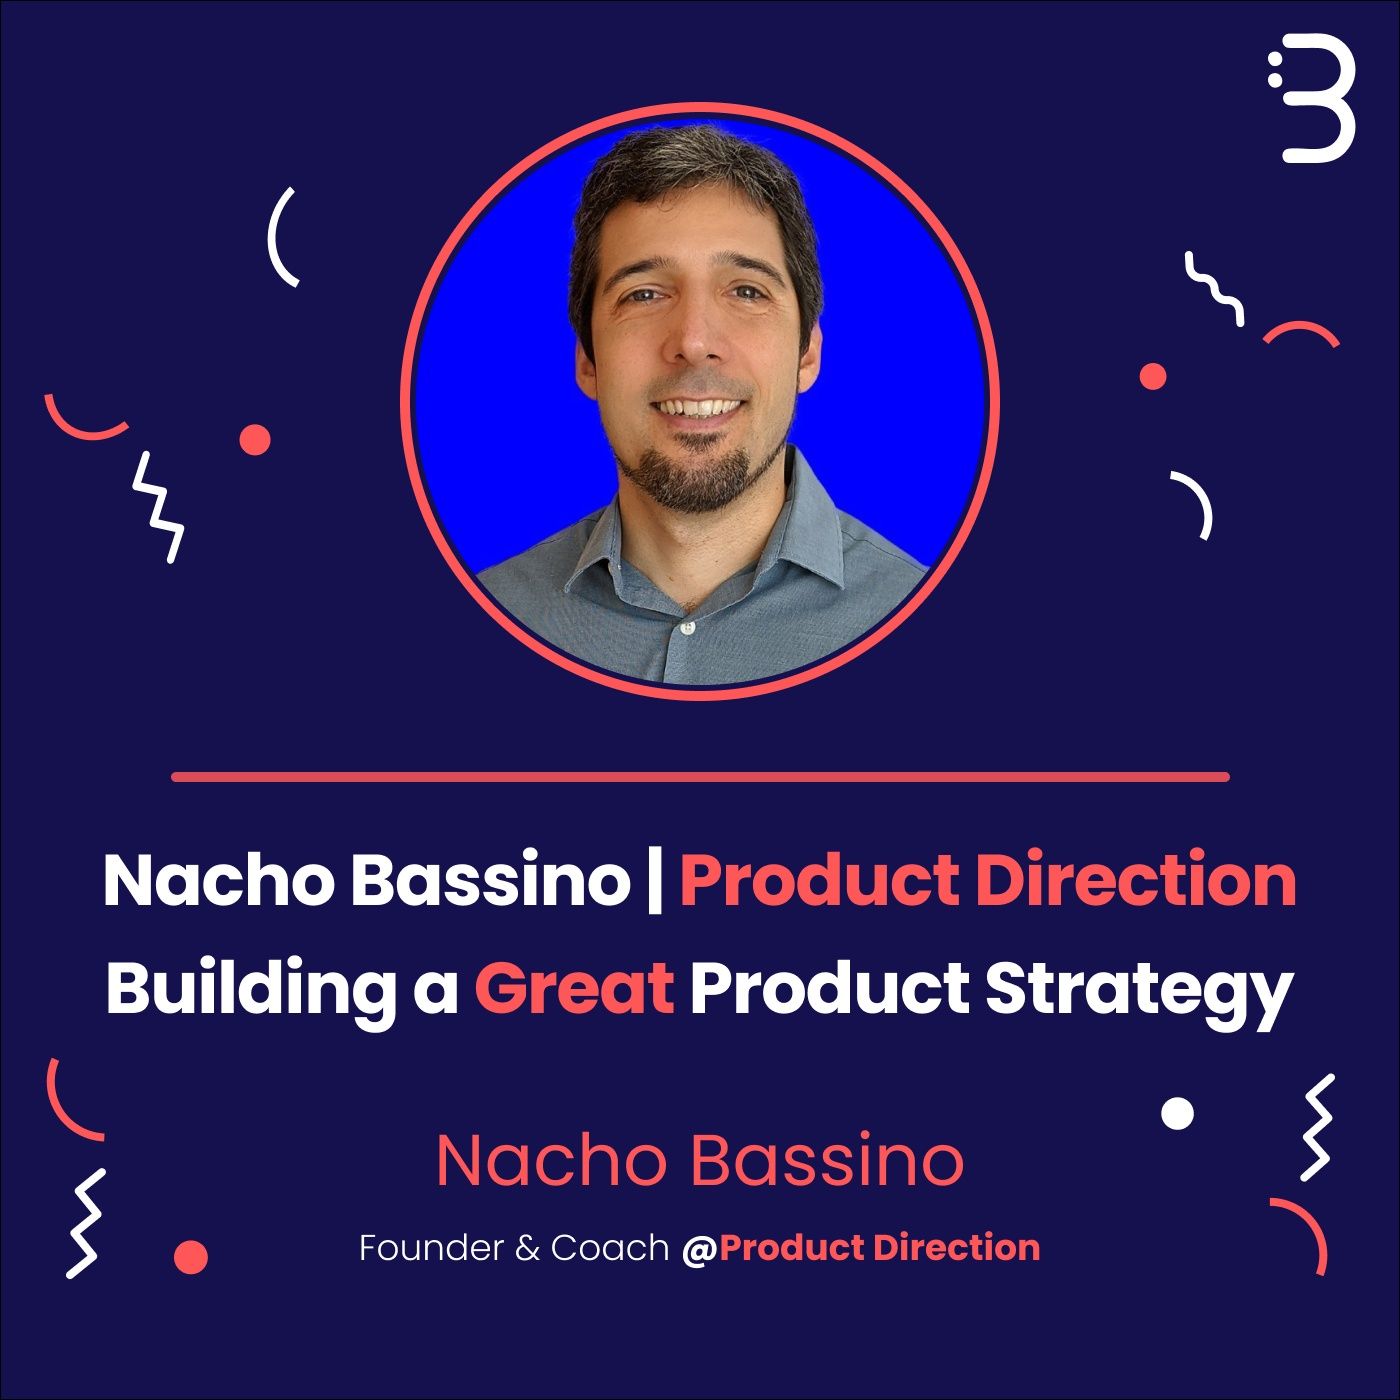 Nacho Bassino | Product Direction - Building a Great Product Strategy